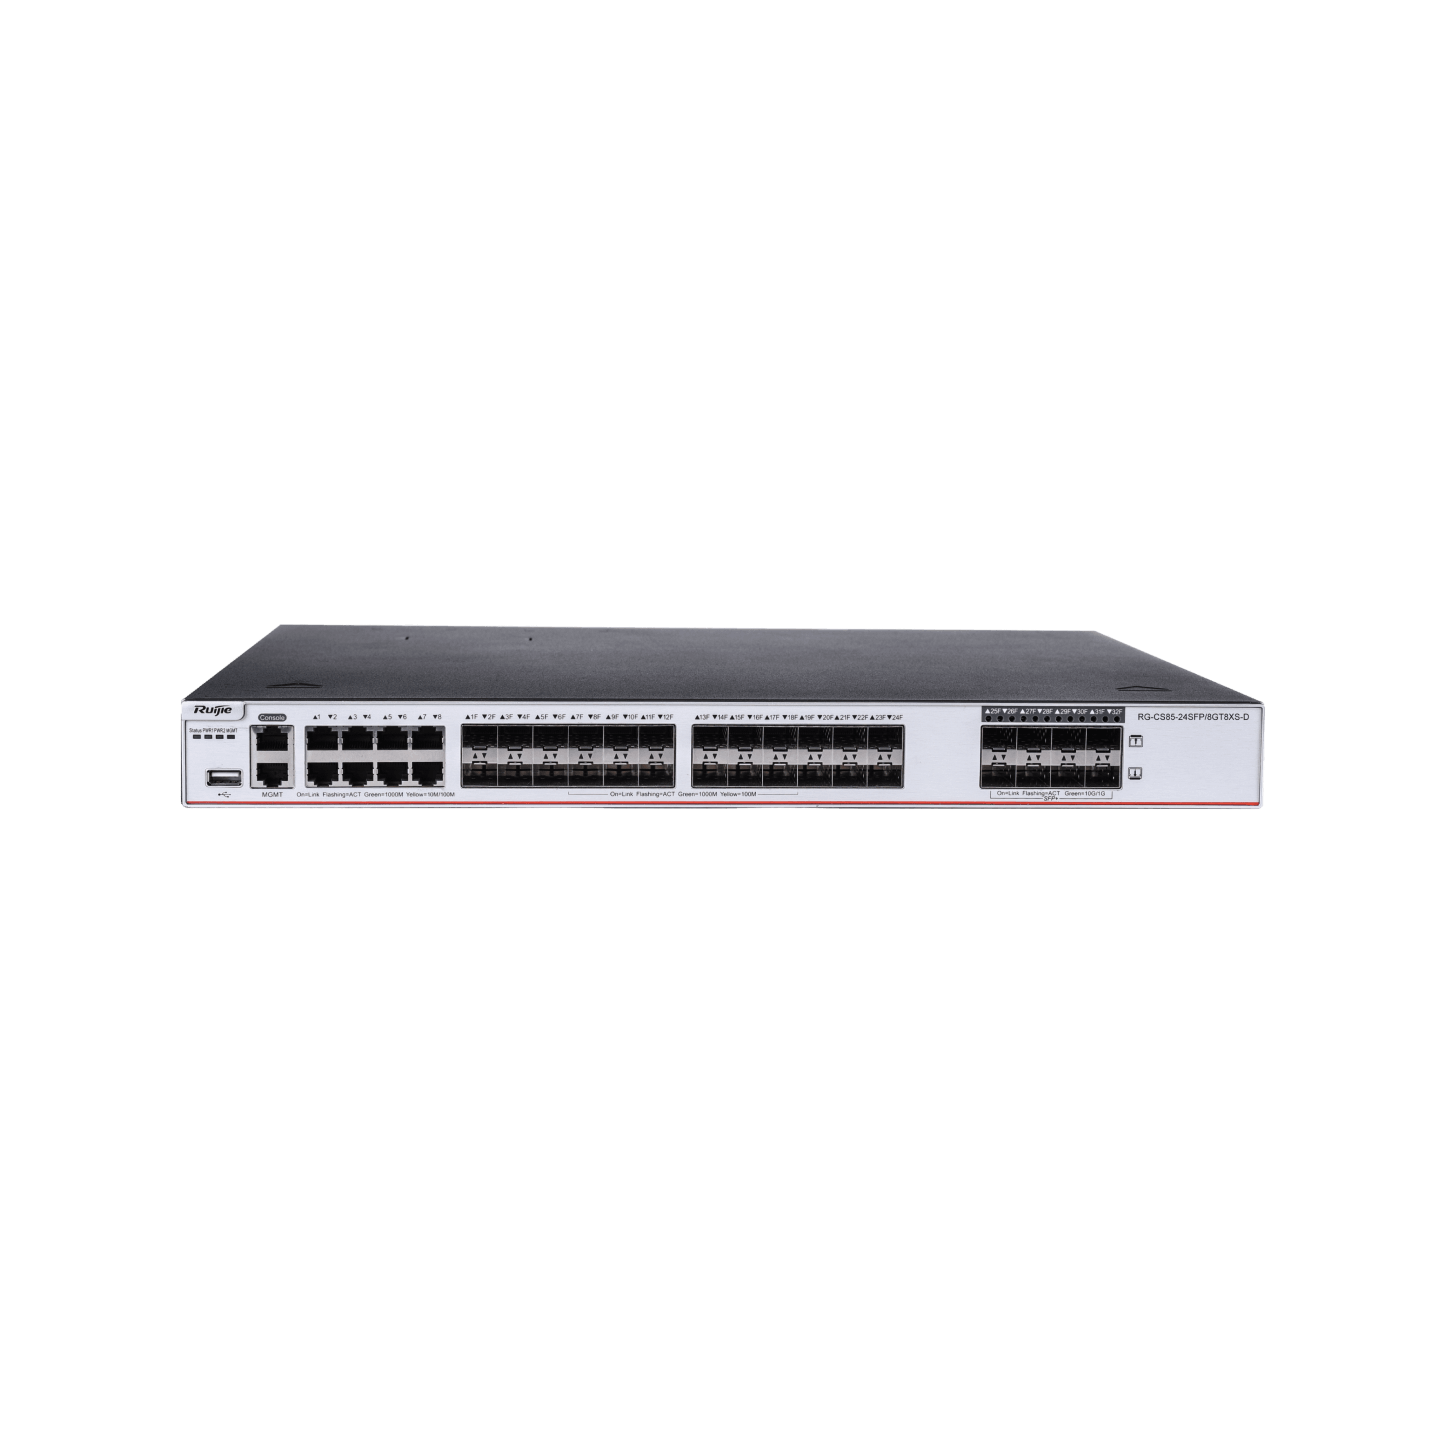 RG-CS85-24SFP/8GT8XS-D 24-Port GE Optical Layer 3 Enterprise-Class Core or Aggregation Switch (with Eight Combo Ports), Eight 10G Uplink Ports